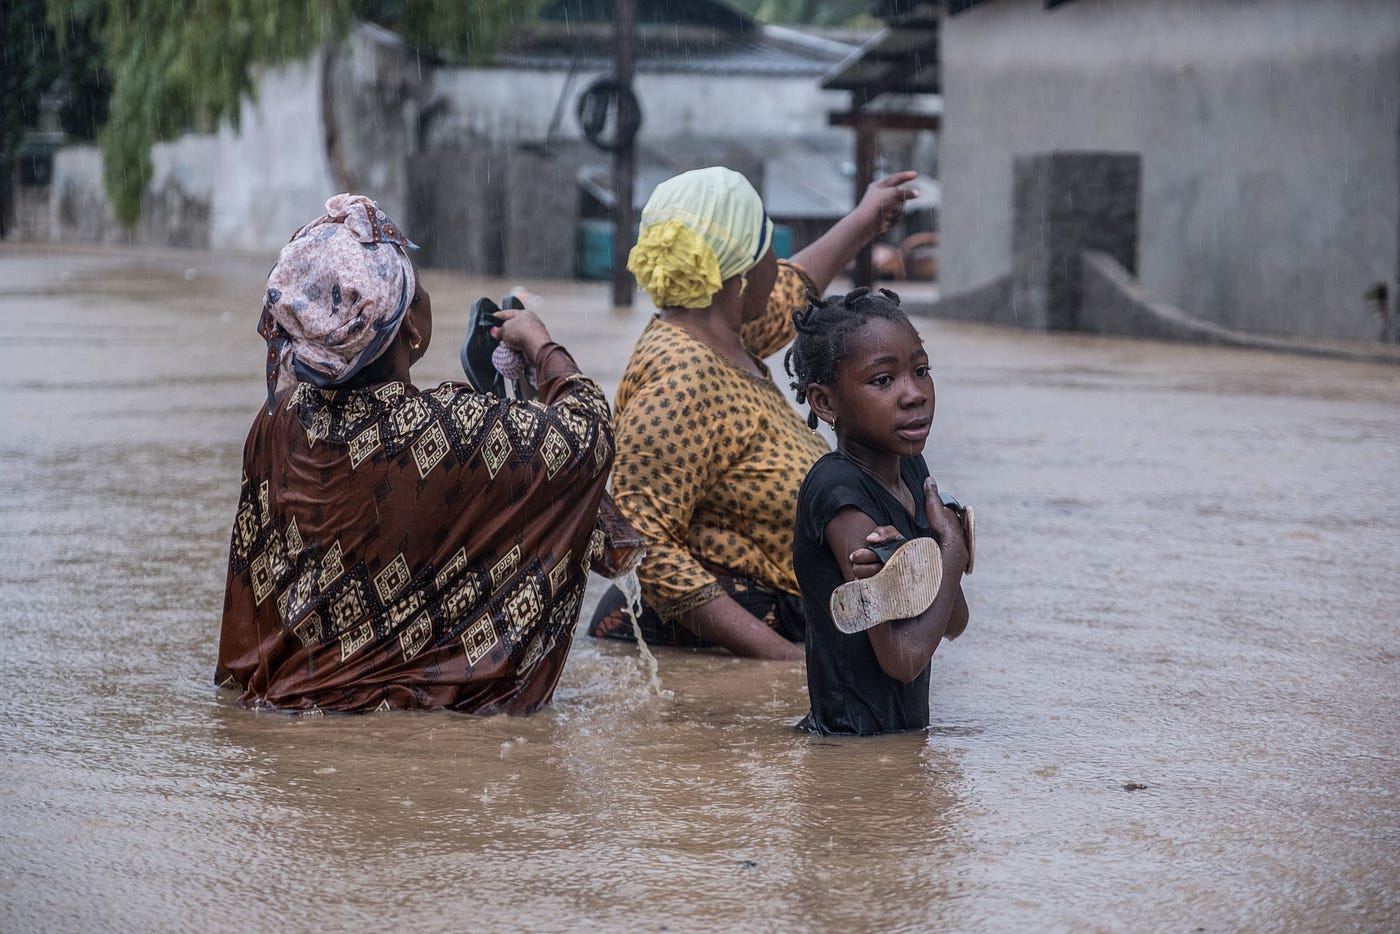 Women in waist-deep water in Pemba, Mozambique, after tropical Cyclone Kenneth. Credit: Tommy Trenchard